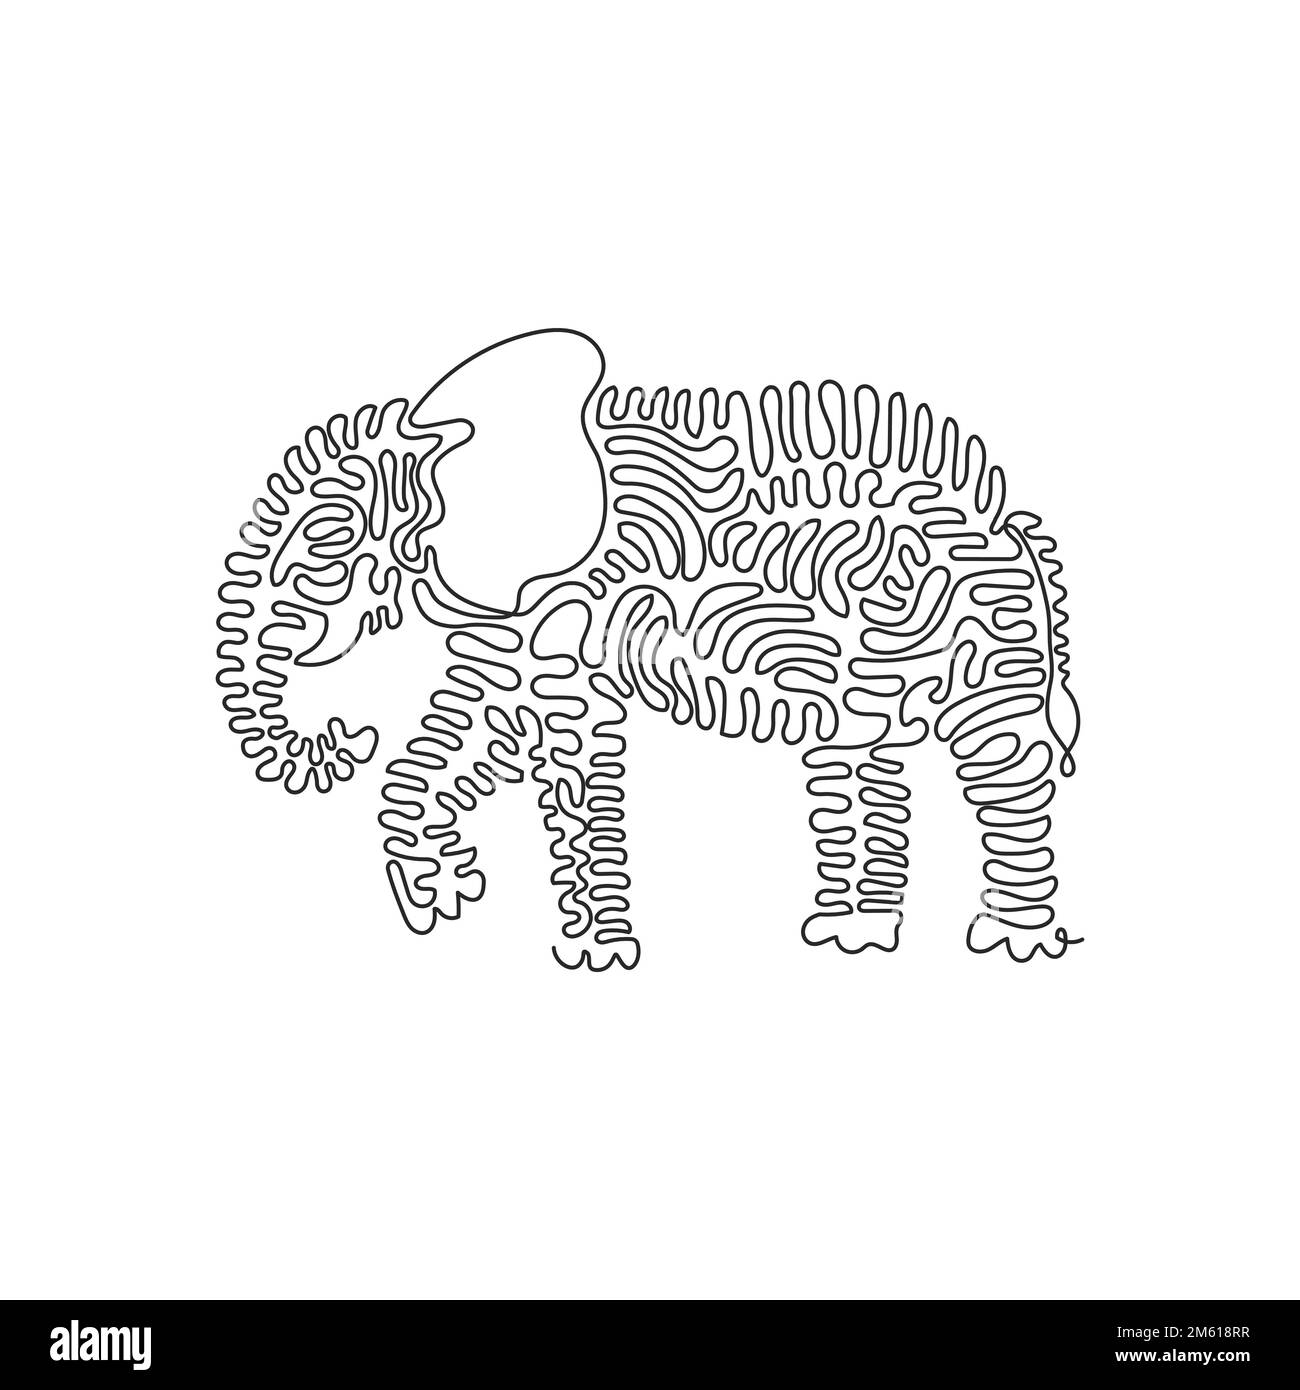 Single curly one line drawing of cute elephant abstract art. Continuous line drawing design vector illustration of enormous elephant Stock Vector